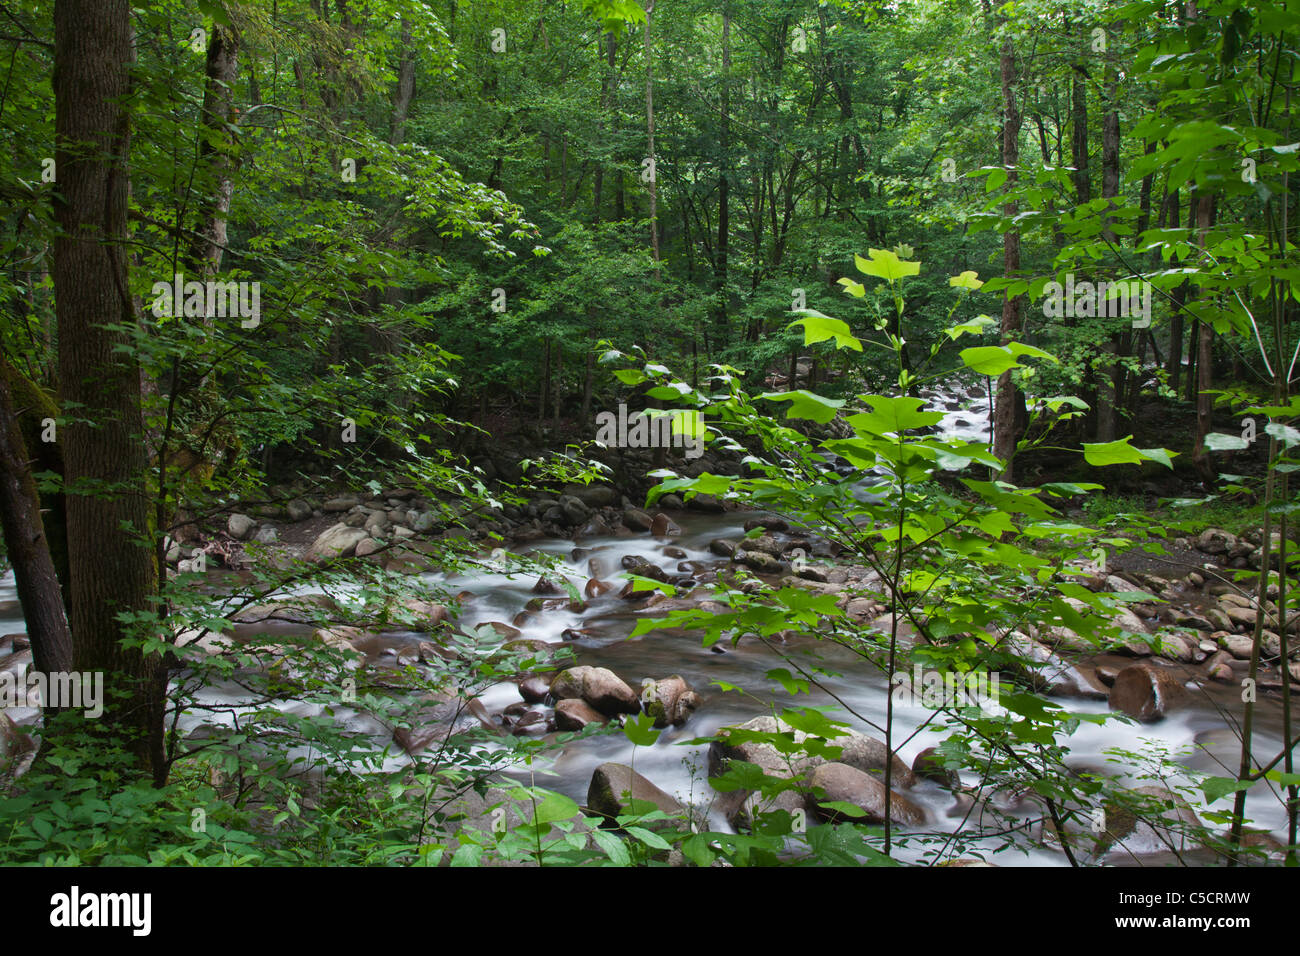 Middle Prong of the Little Pigeon River in the Greenbrier section of the Great Smoky Mountains National Park in Tennessee. Stock Photo